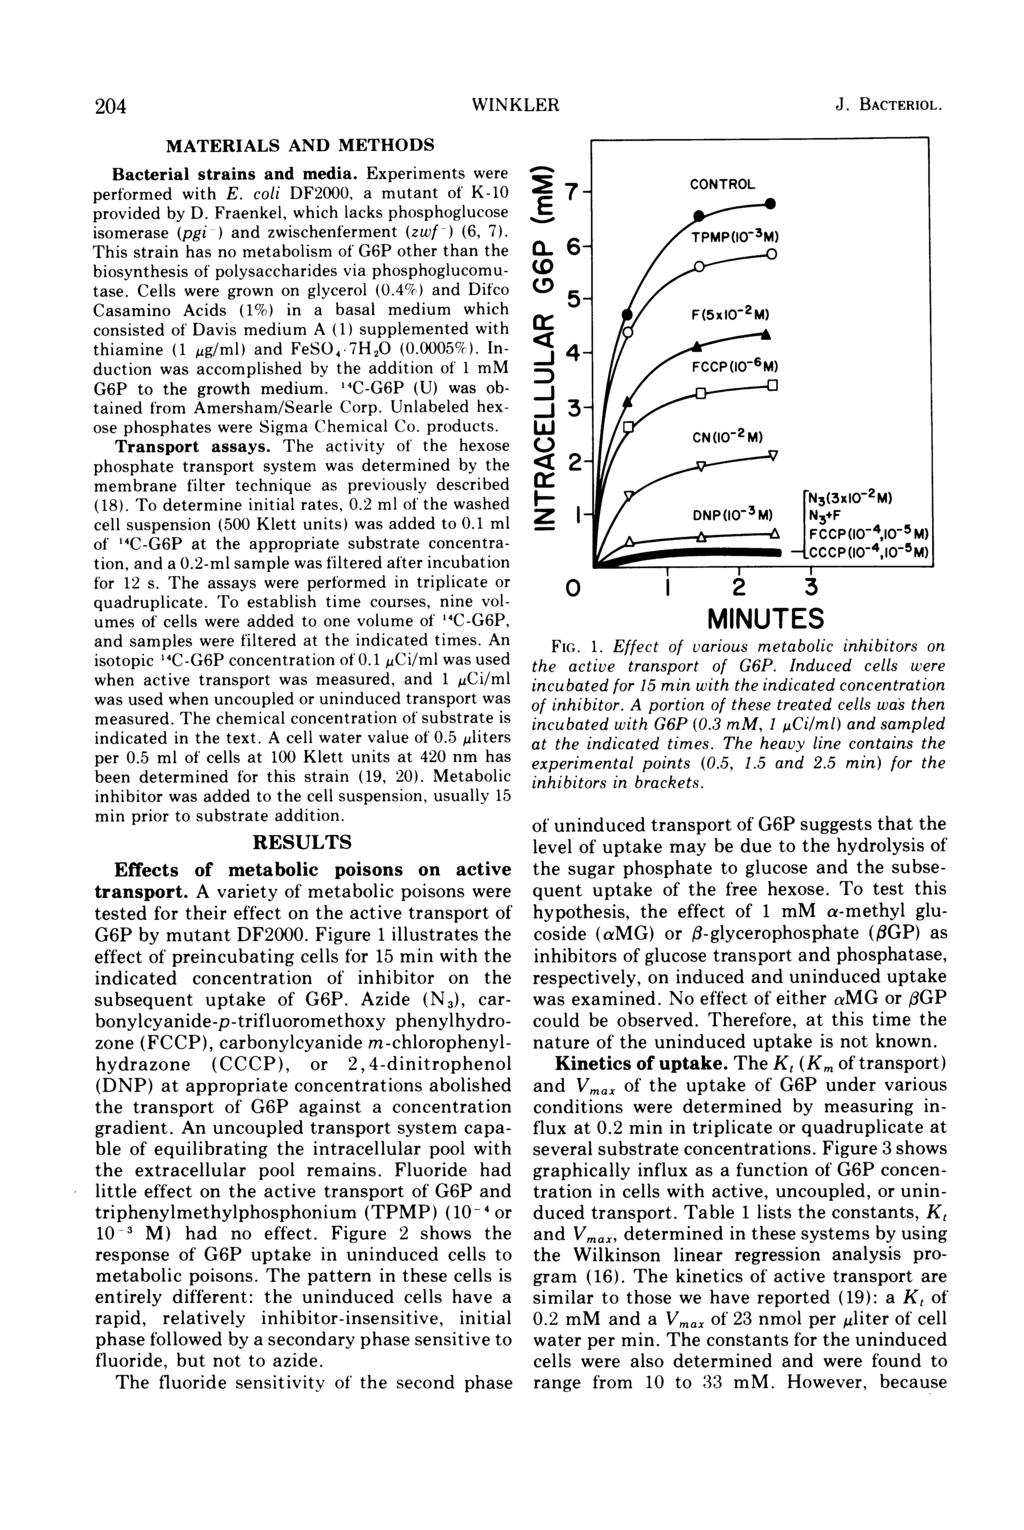 204 WINKLER MATERIALS AND METHODS Bacterial strains and media. Experiments were pert'ormed with E. coli DF2000, a mutant of K-10 provided by D.